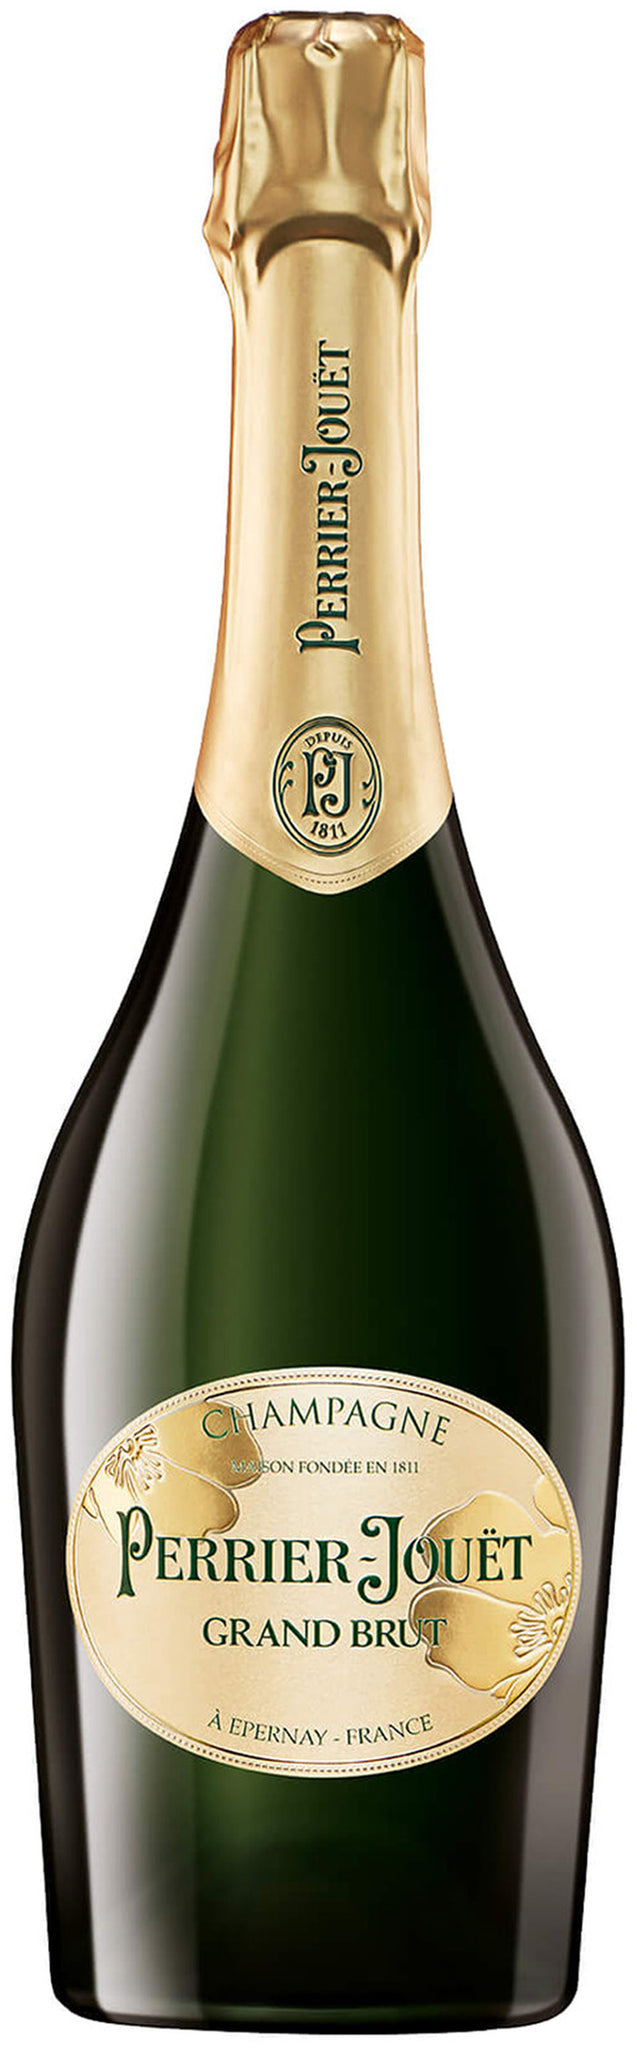 Champagne PERRIER JOUET GRAND BRUT